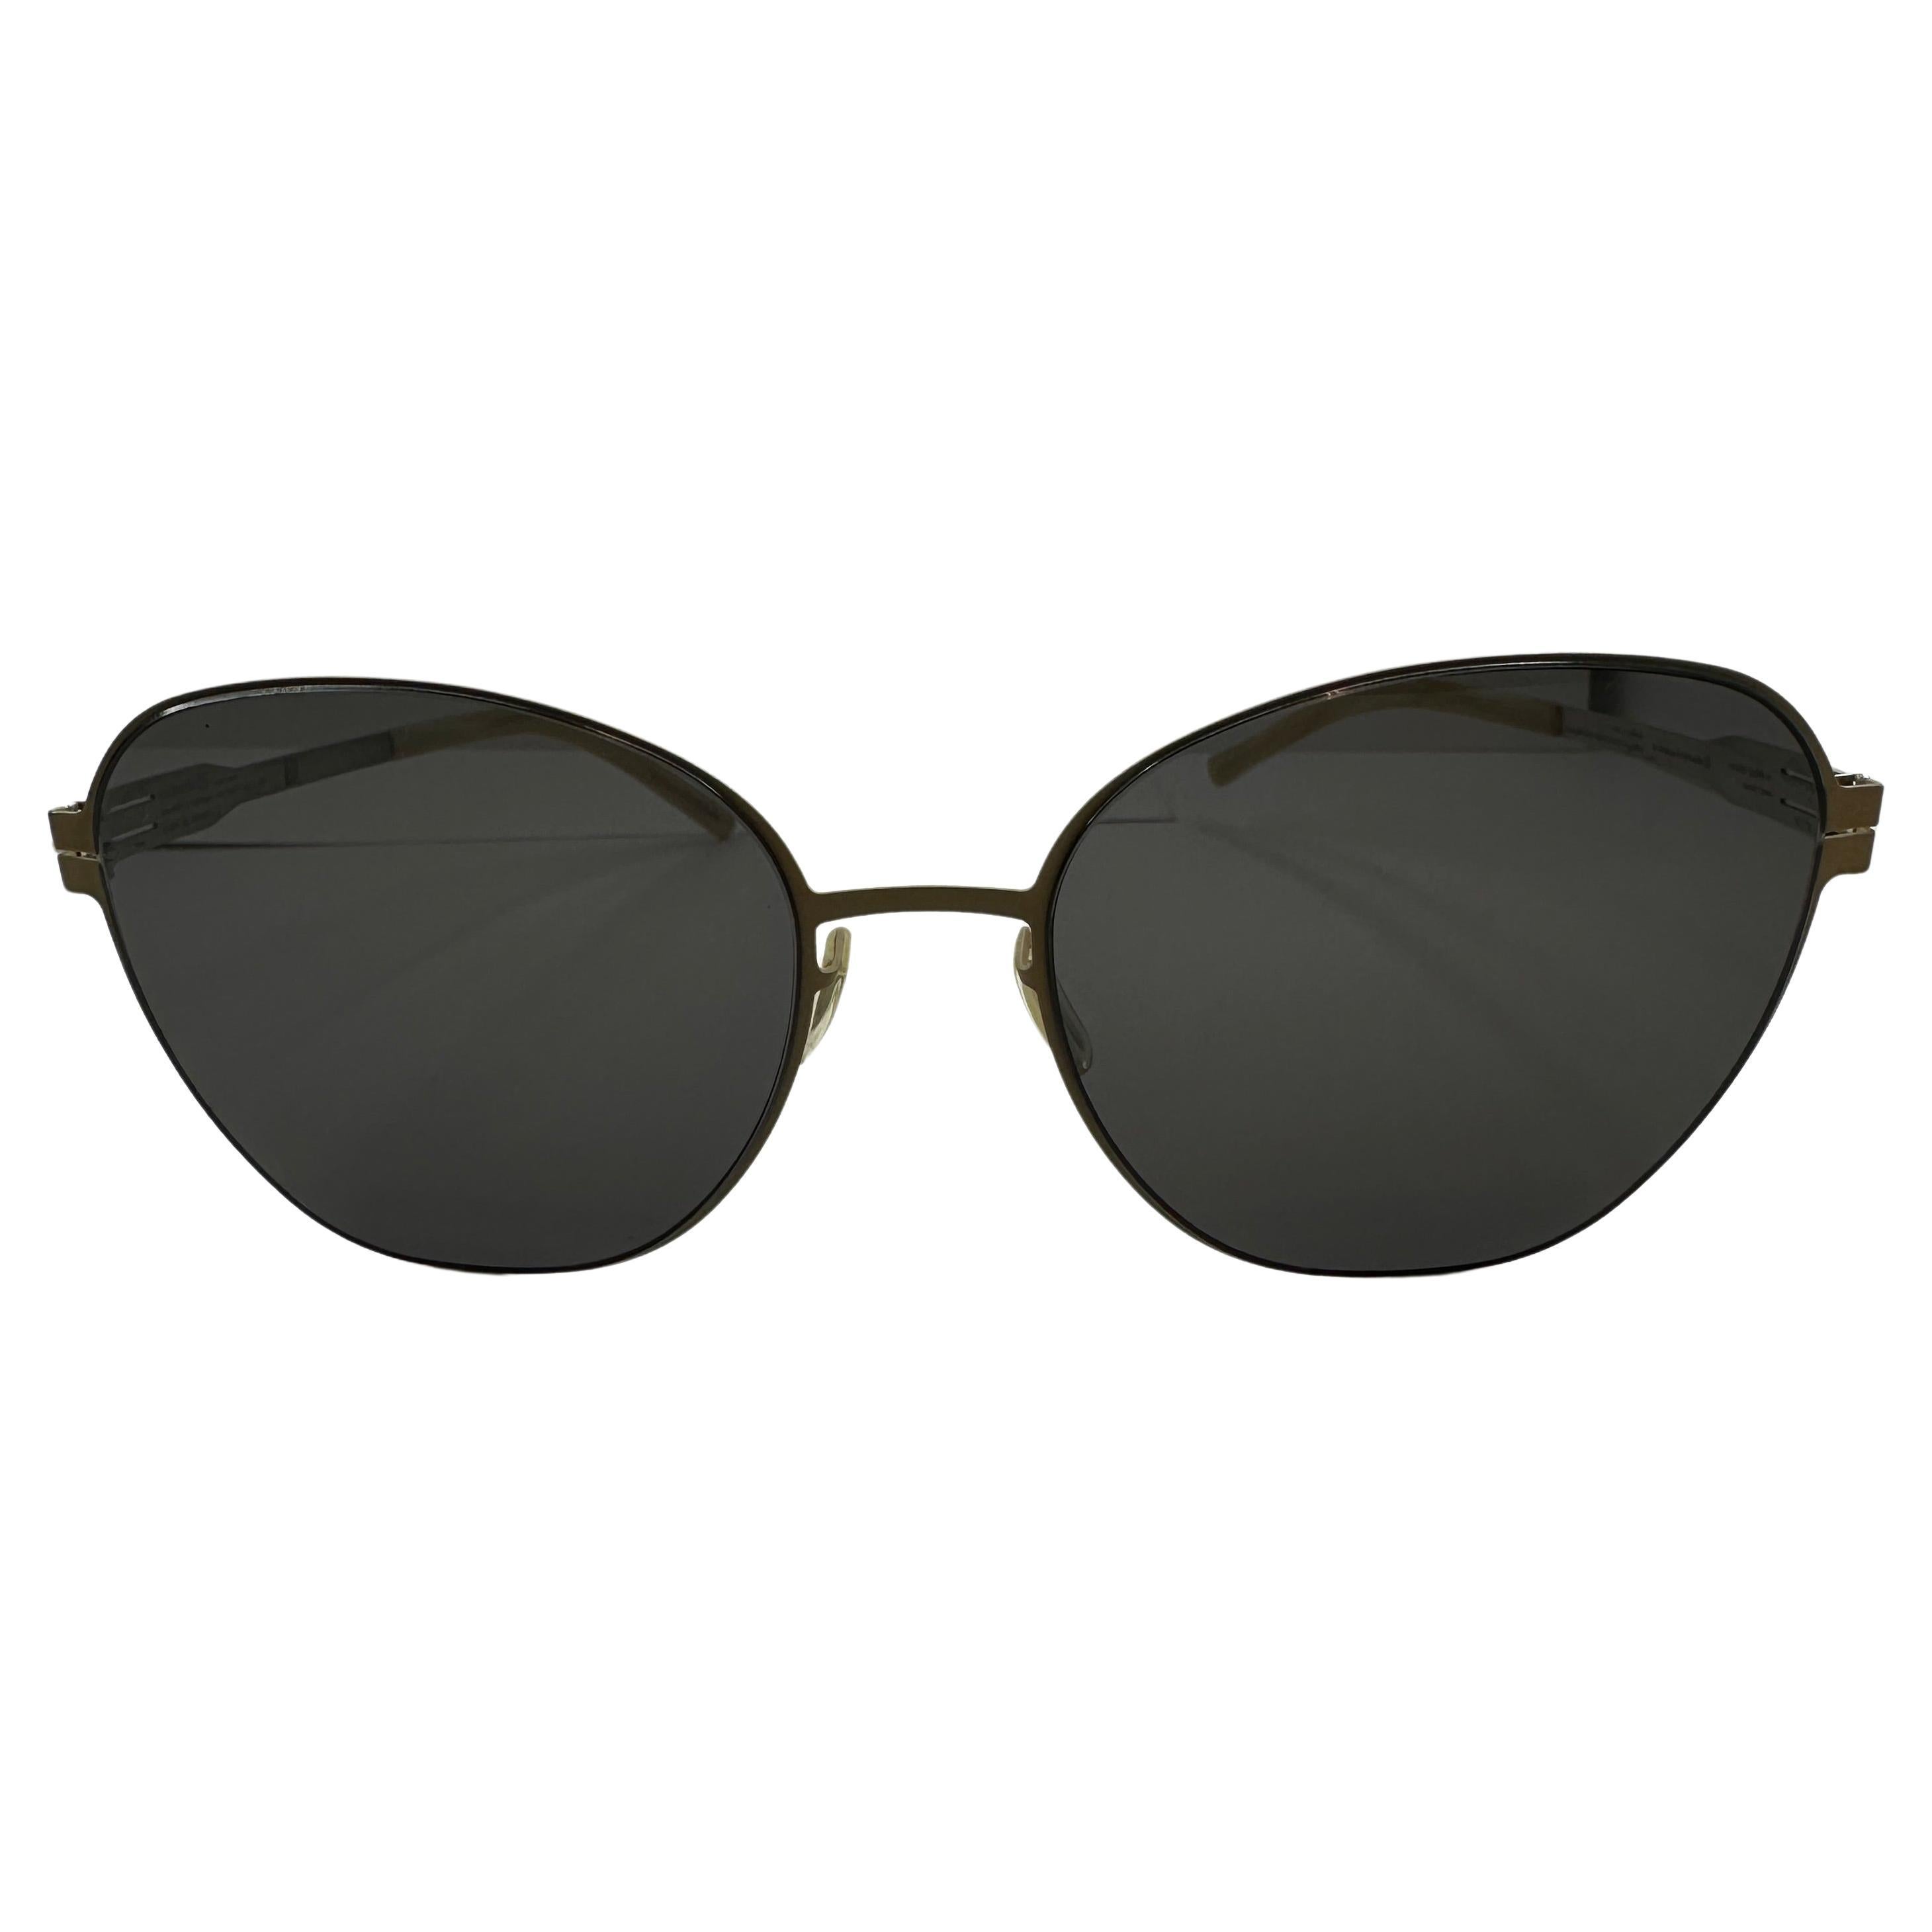 Ic! Berlin "Limit Edition" Signature "SpringBack" Arms Sunglasses For Sale